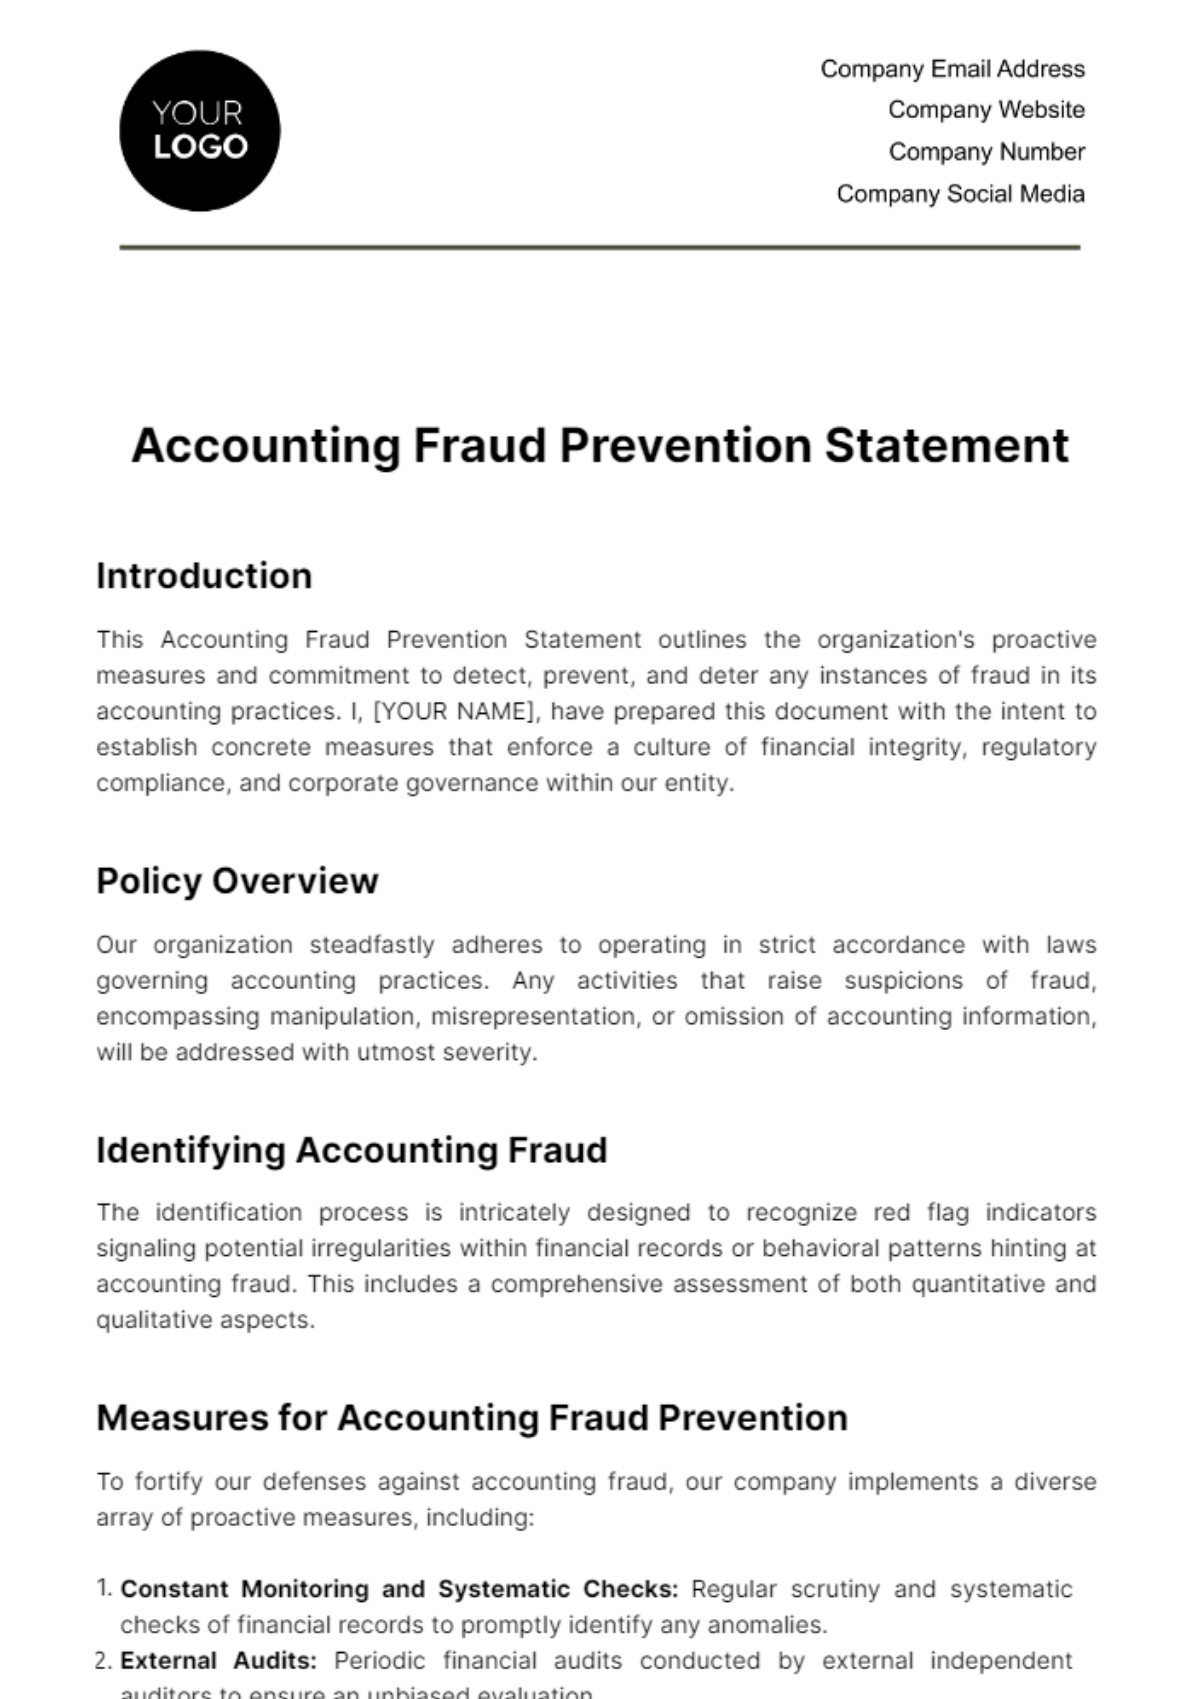 Accounting Fraud Prevention Statement Template